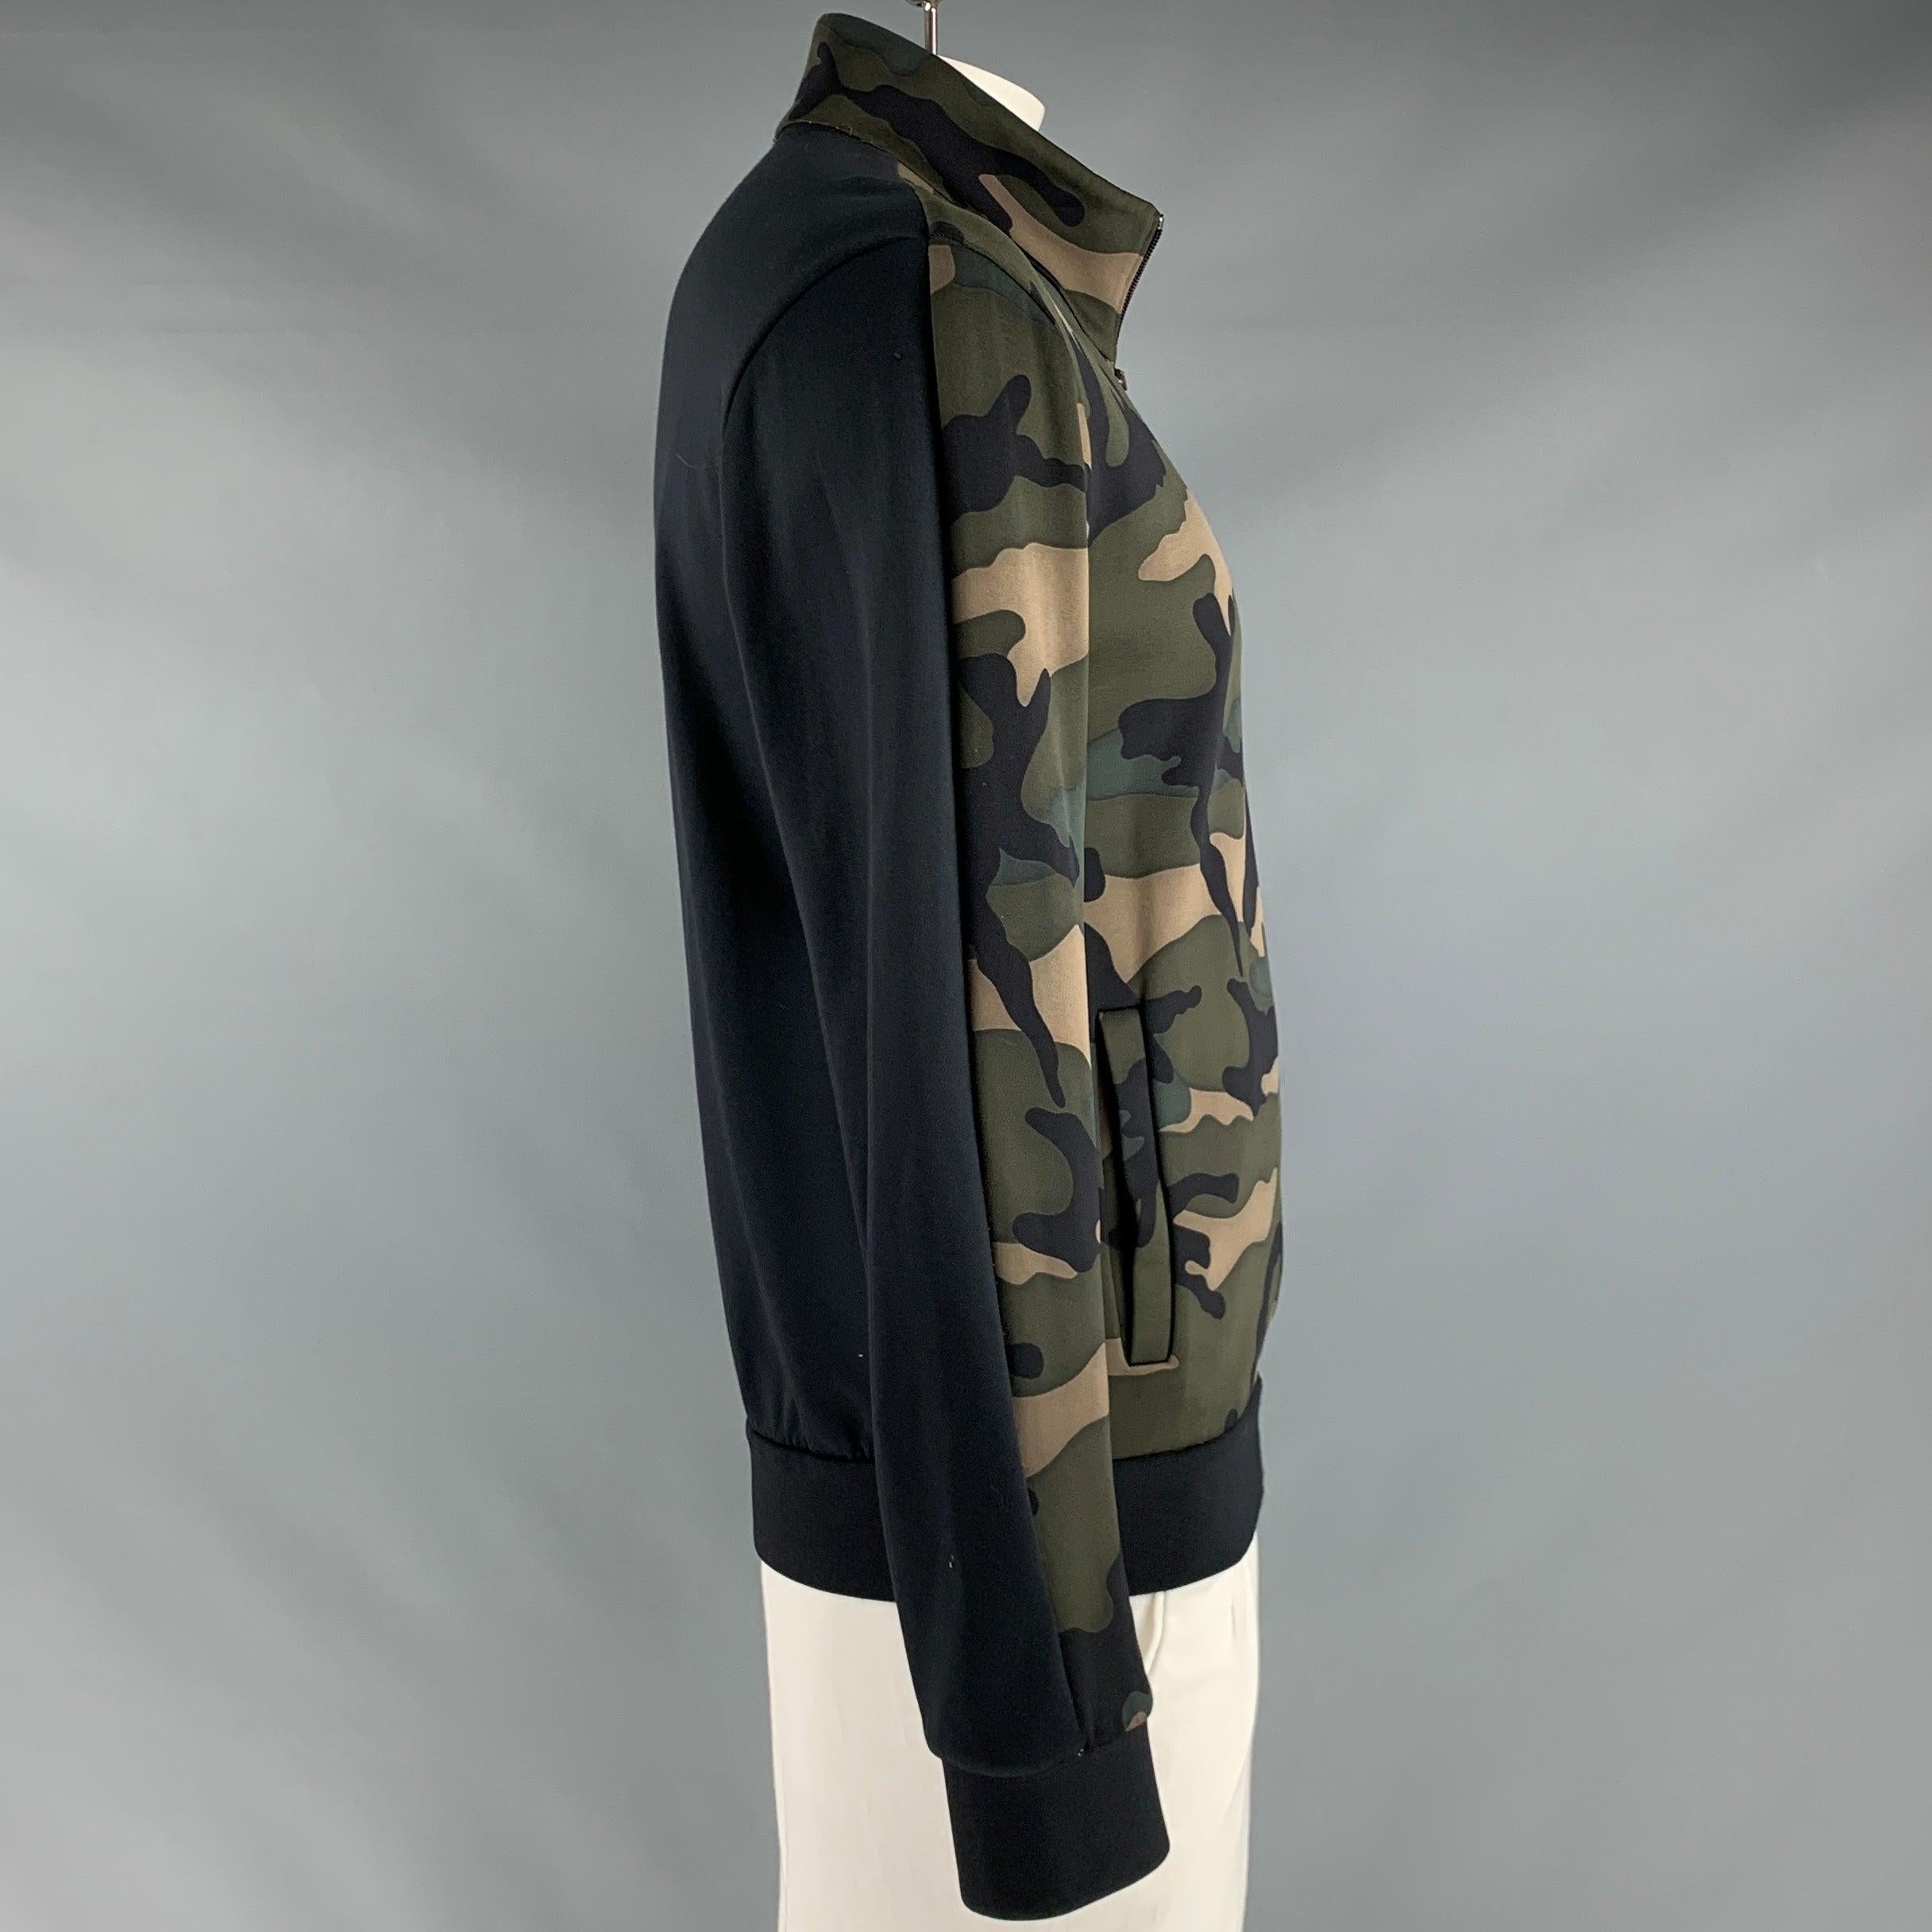 VALENTINO SPA jacket
in a green and brown cotton blend fabric featuring all over camo pattern, two pockets, ribbed cuffs, and a zip up closure. Made in Italy.Excellent Pre-Owned Condition. 

Marked:   XL 

Measurements: 
 
Shoulder: 21.5 inches 